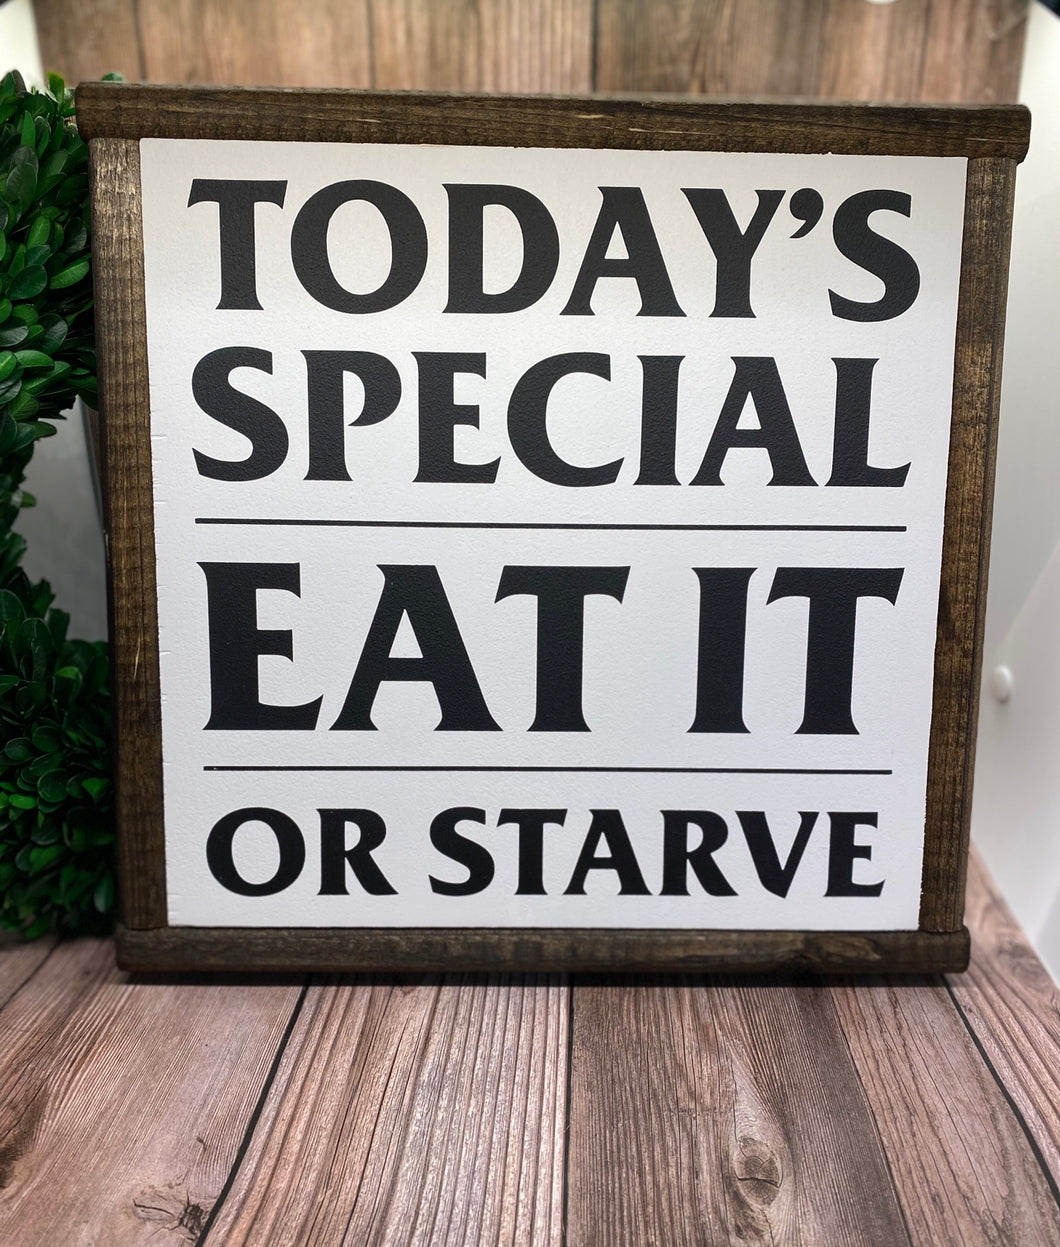 Today's Special Eat It Or Starve